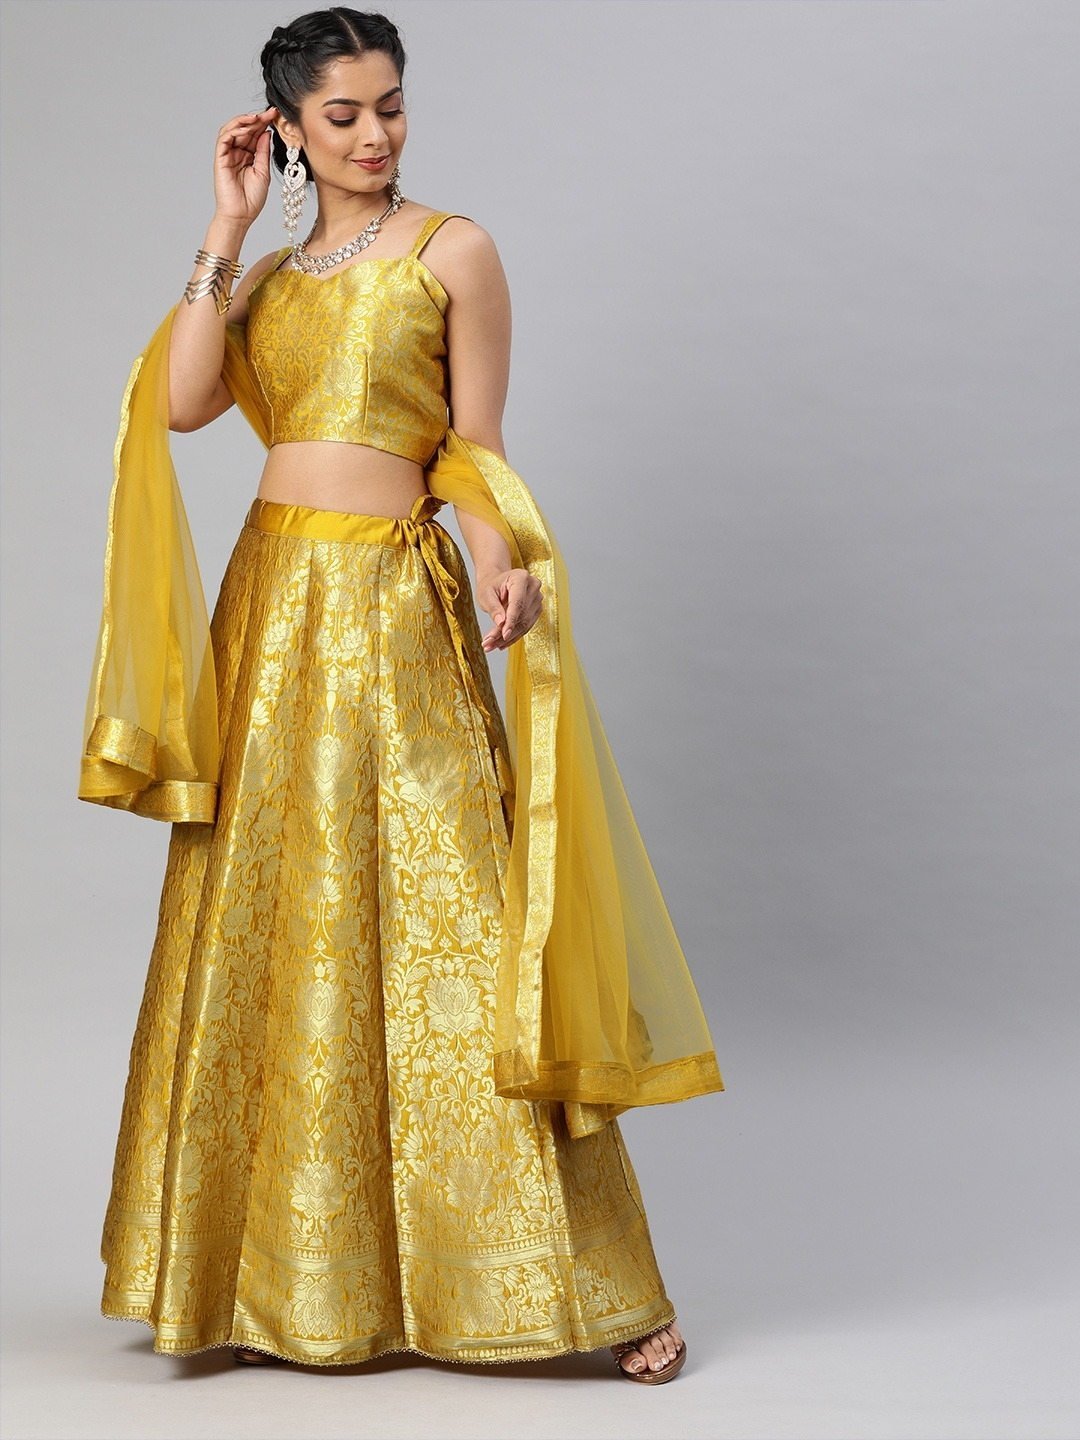 Buy Viral Fashion Golden Color Lehenga Choli with Contrast Dupatta (Golden)  at Amazon.in